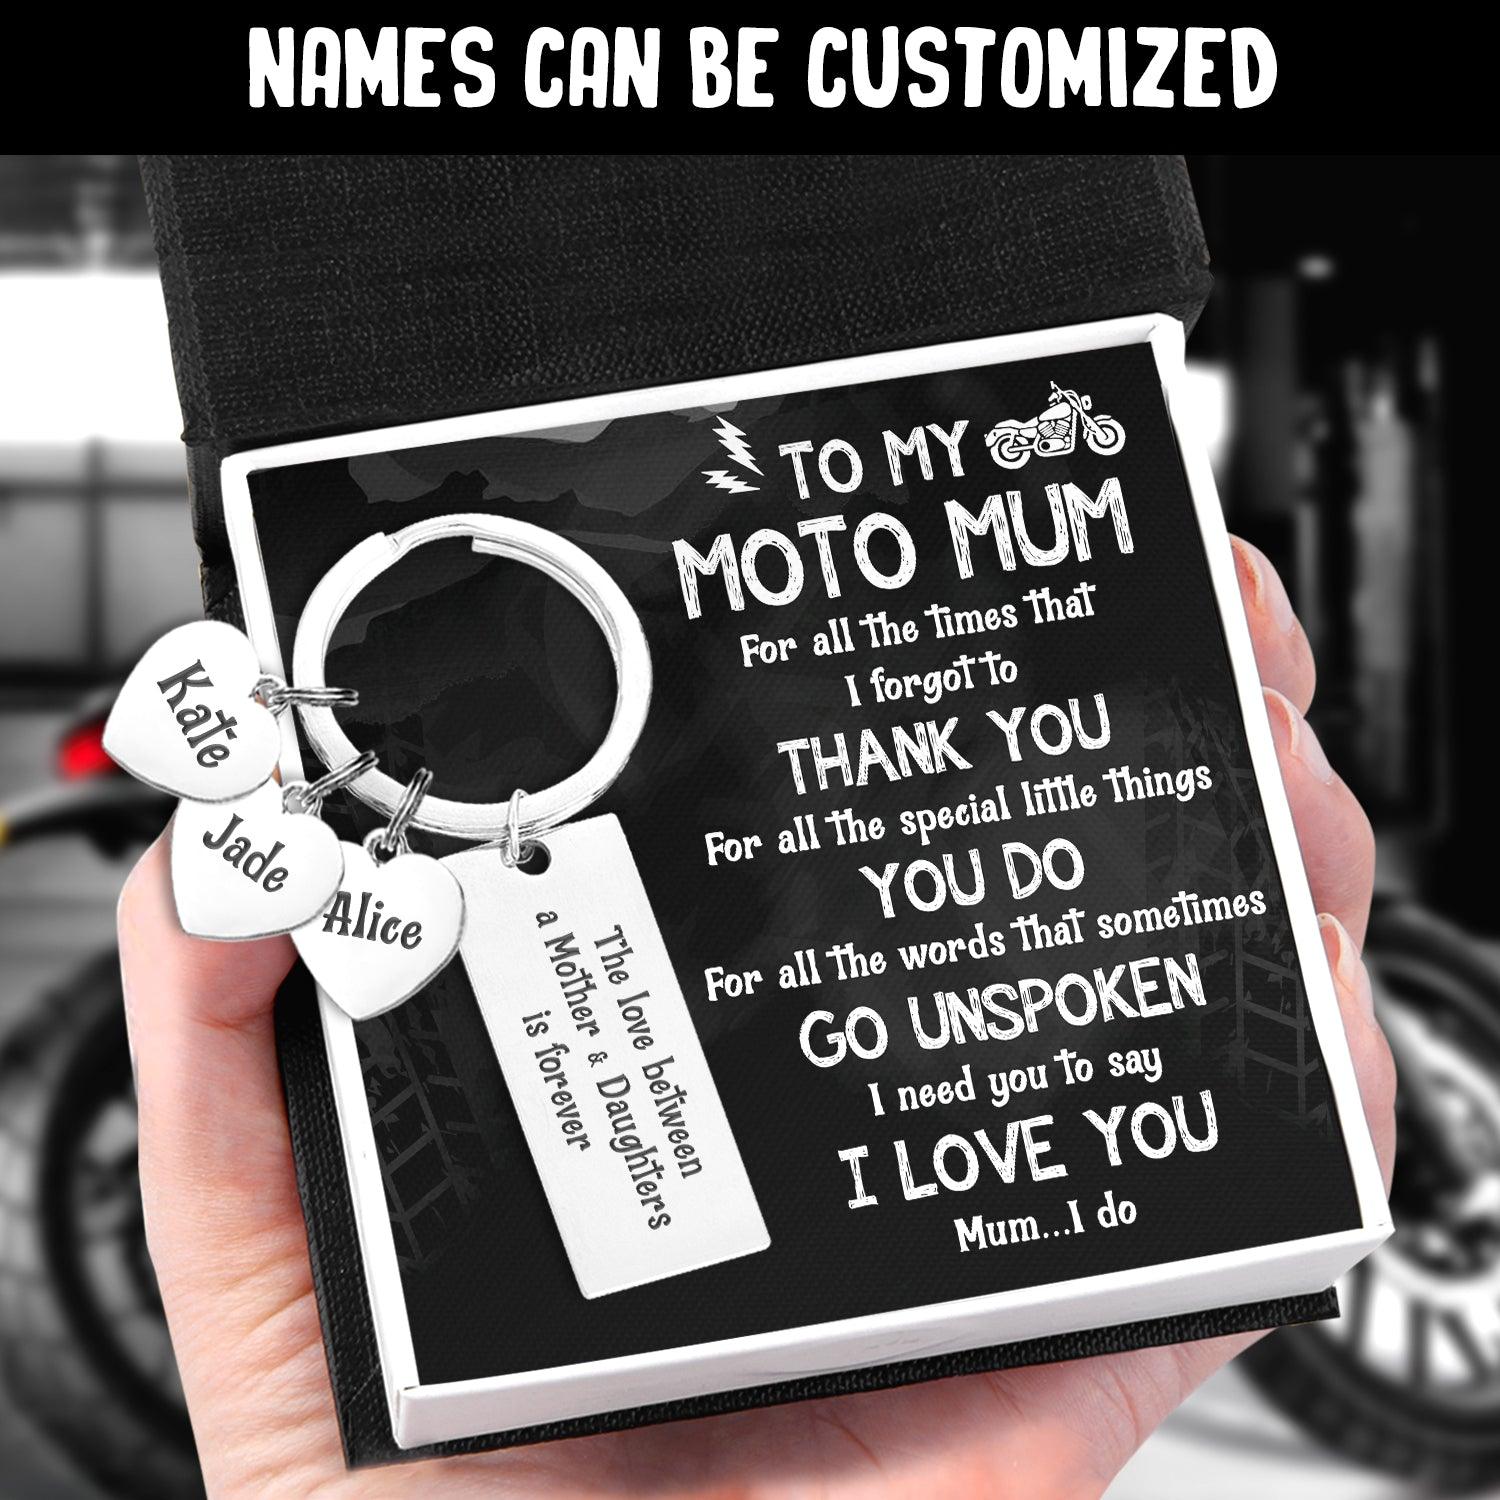 Personalised Keychain - Biker - To My Moto Mum - From Daughter - For All The Special Little Things You Do - Augkc19004 - Gifts Holder